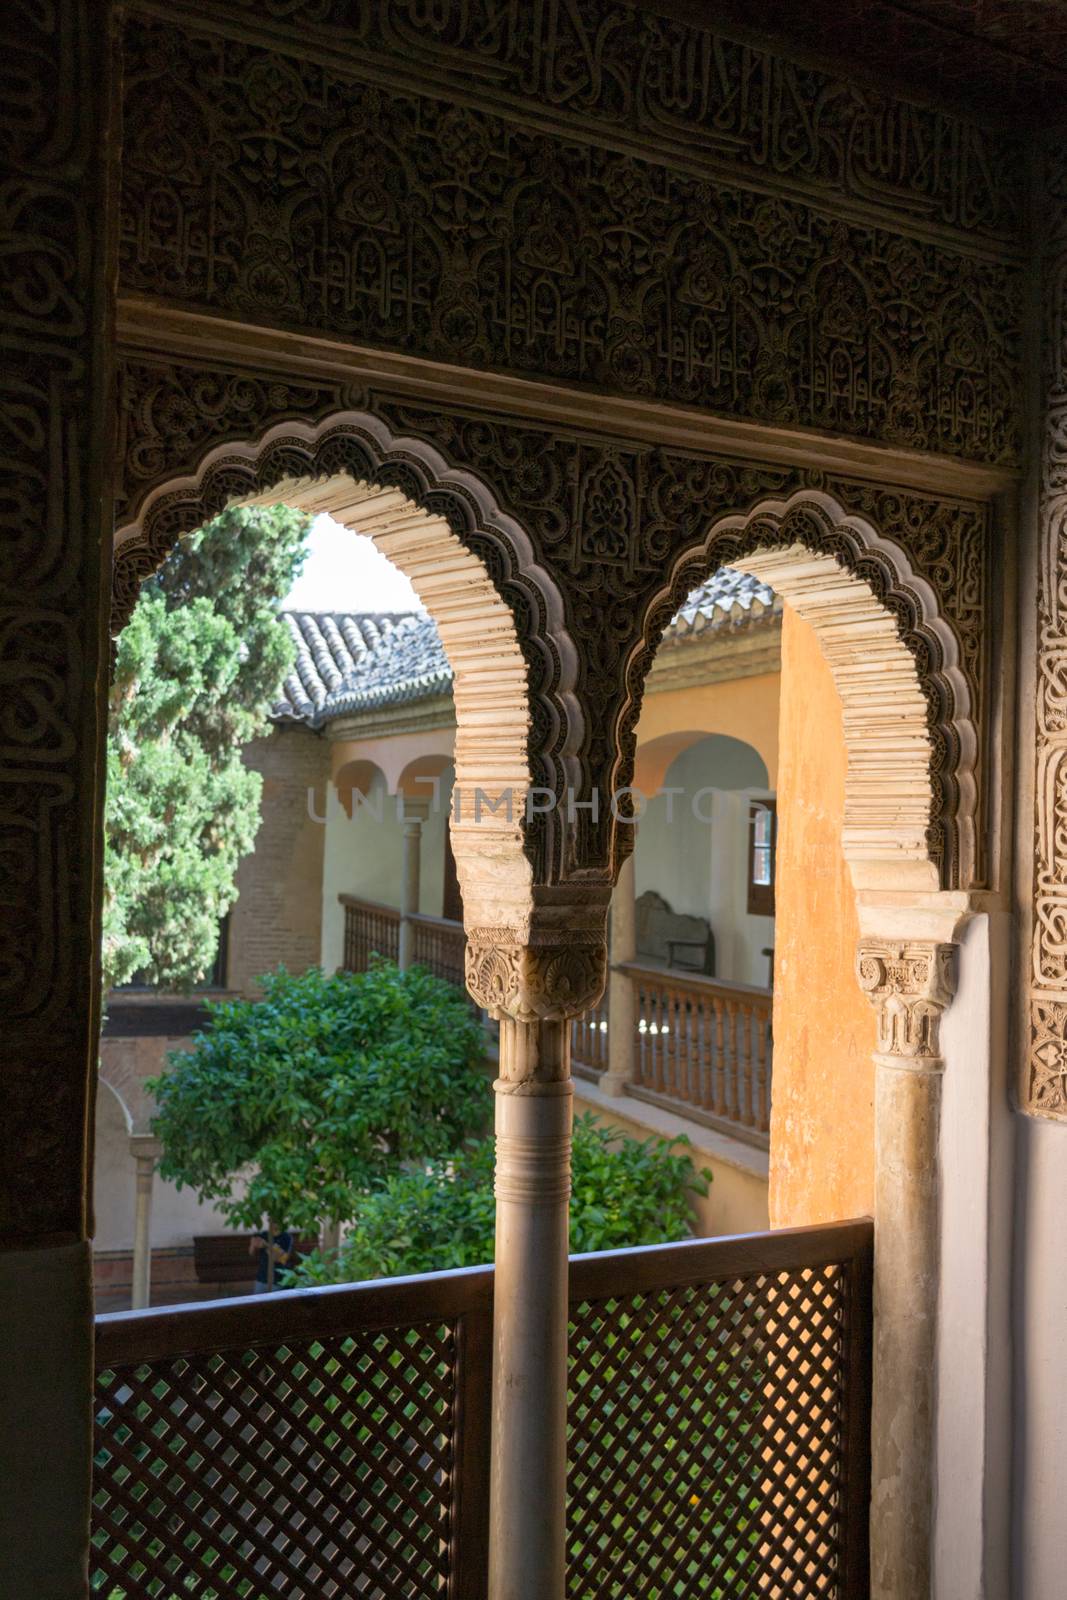 Alhambra palace located in Granada (Spain) is a master pice of the Islamic/Muslim Architecture in Europe